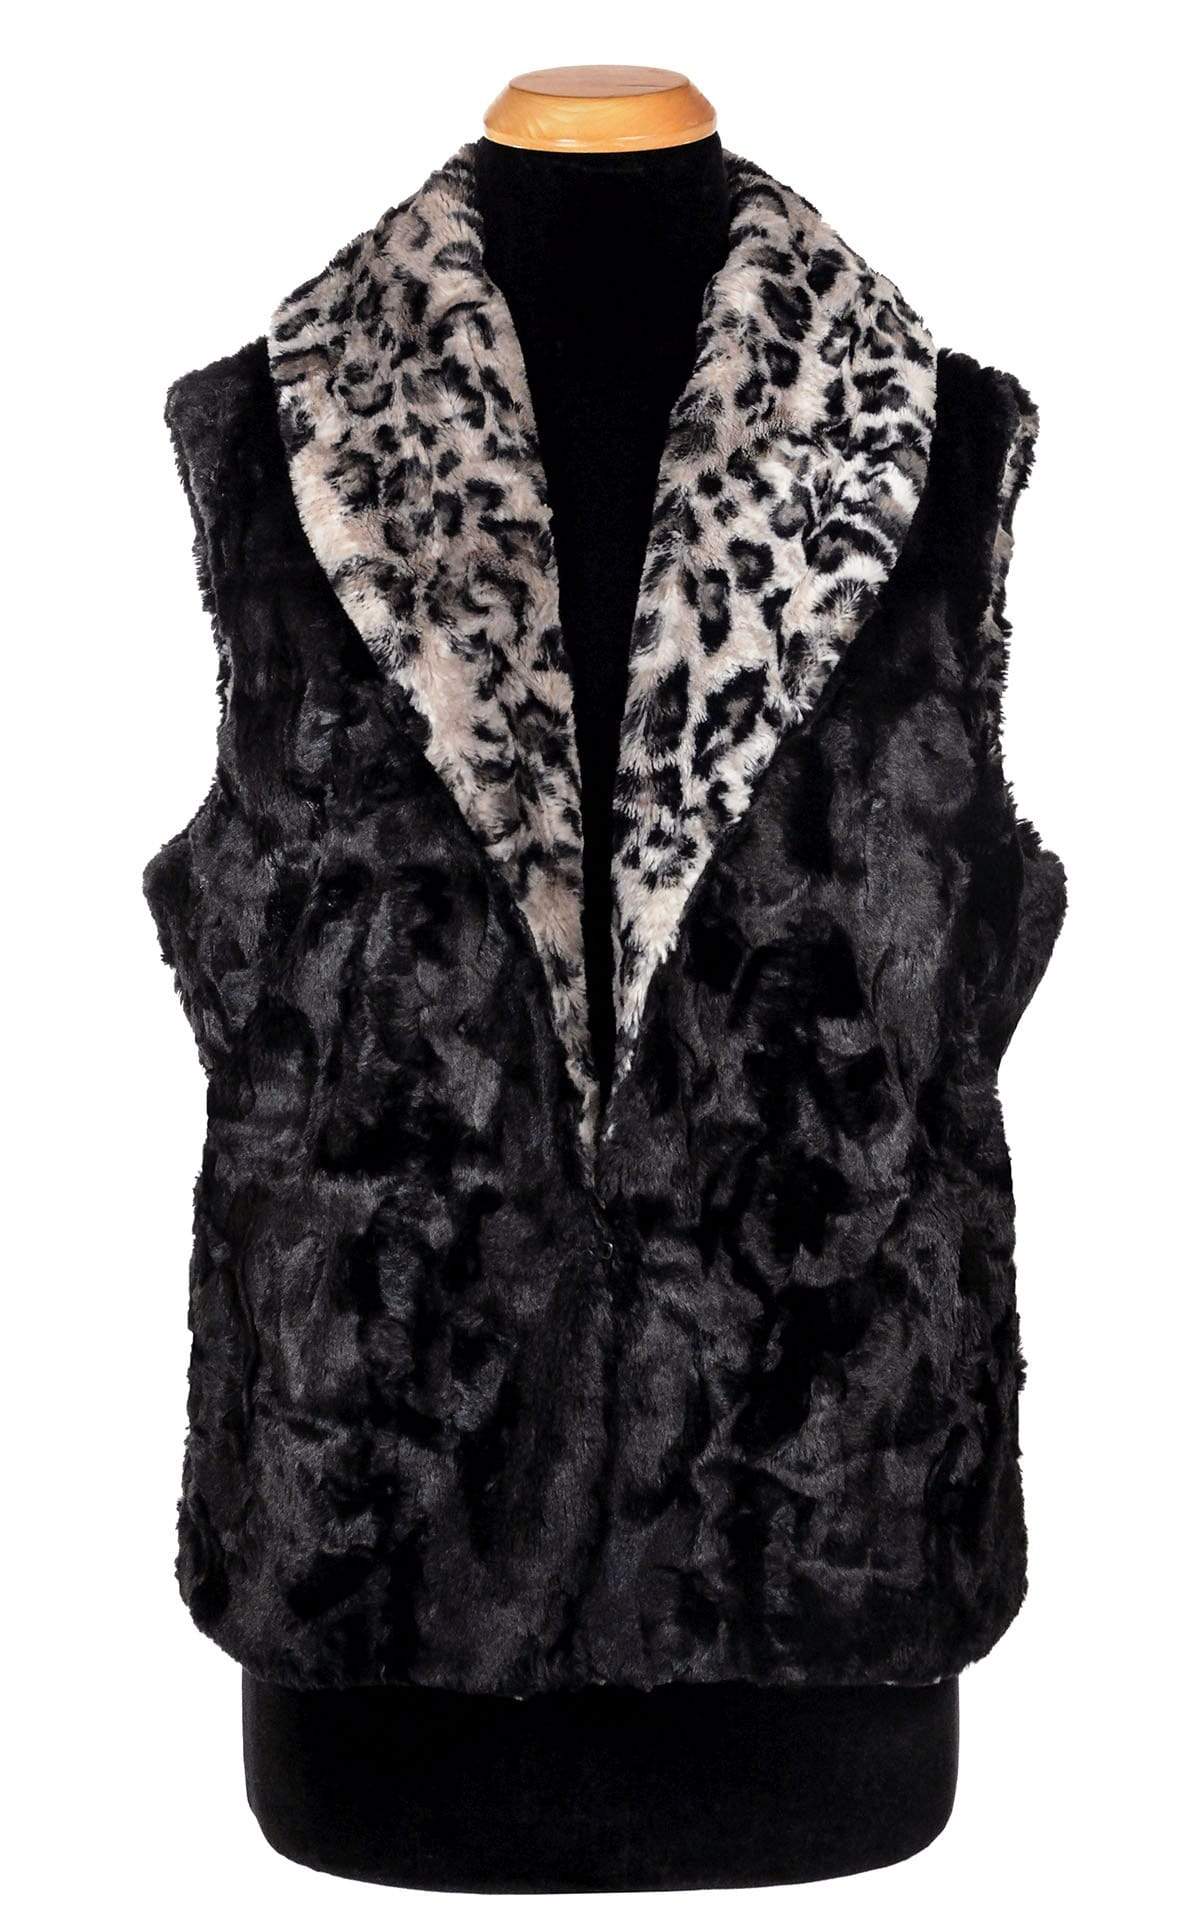 Reversed Shawl Collar Vest | Savannah Cat in Gray Faux Fur with Cuddly Black Faux Fur | Handmade by Pandemonium Millinery | Seattle WA